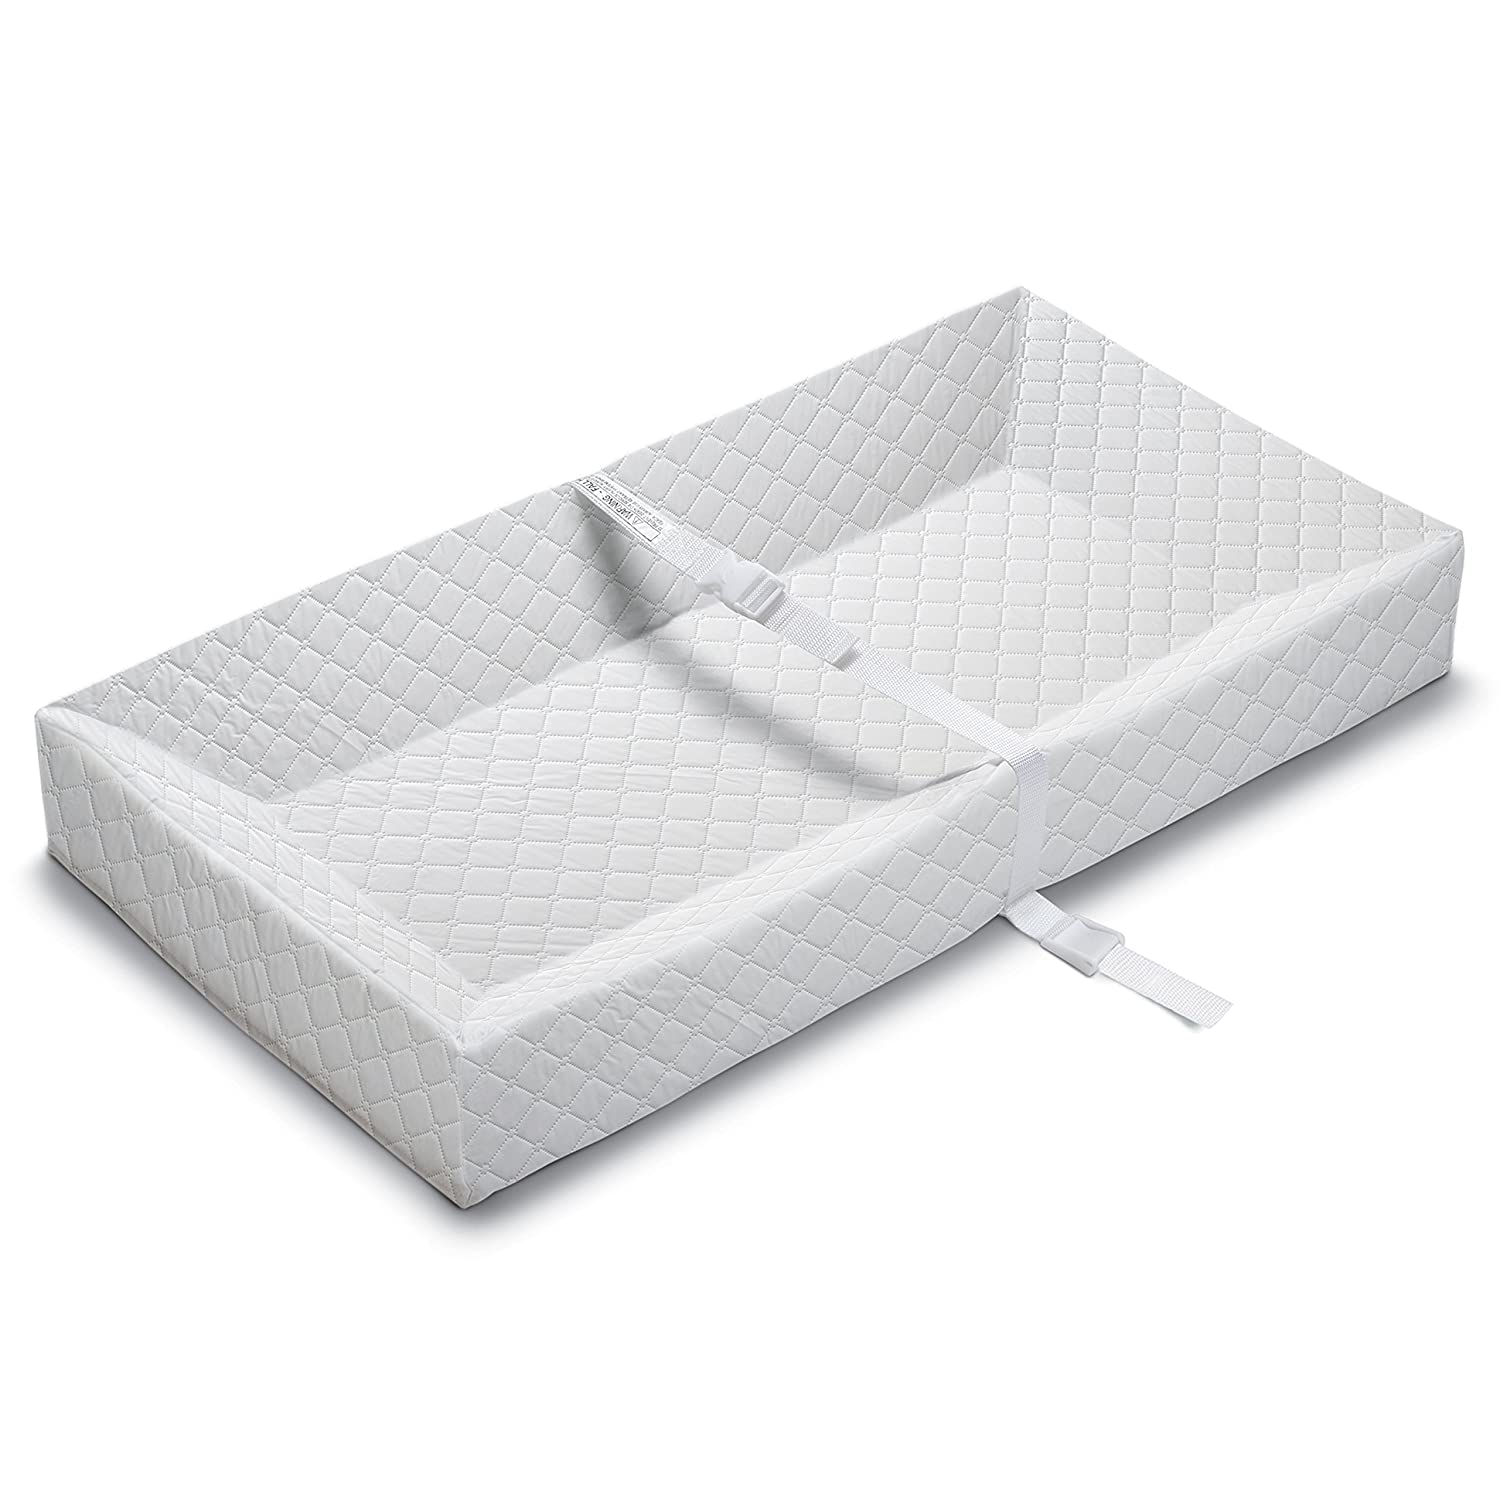 Summer Infant 4-Sided Changing Pad